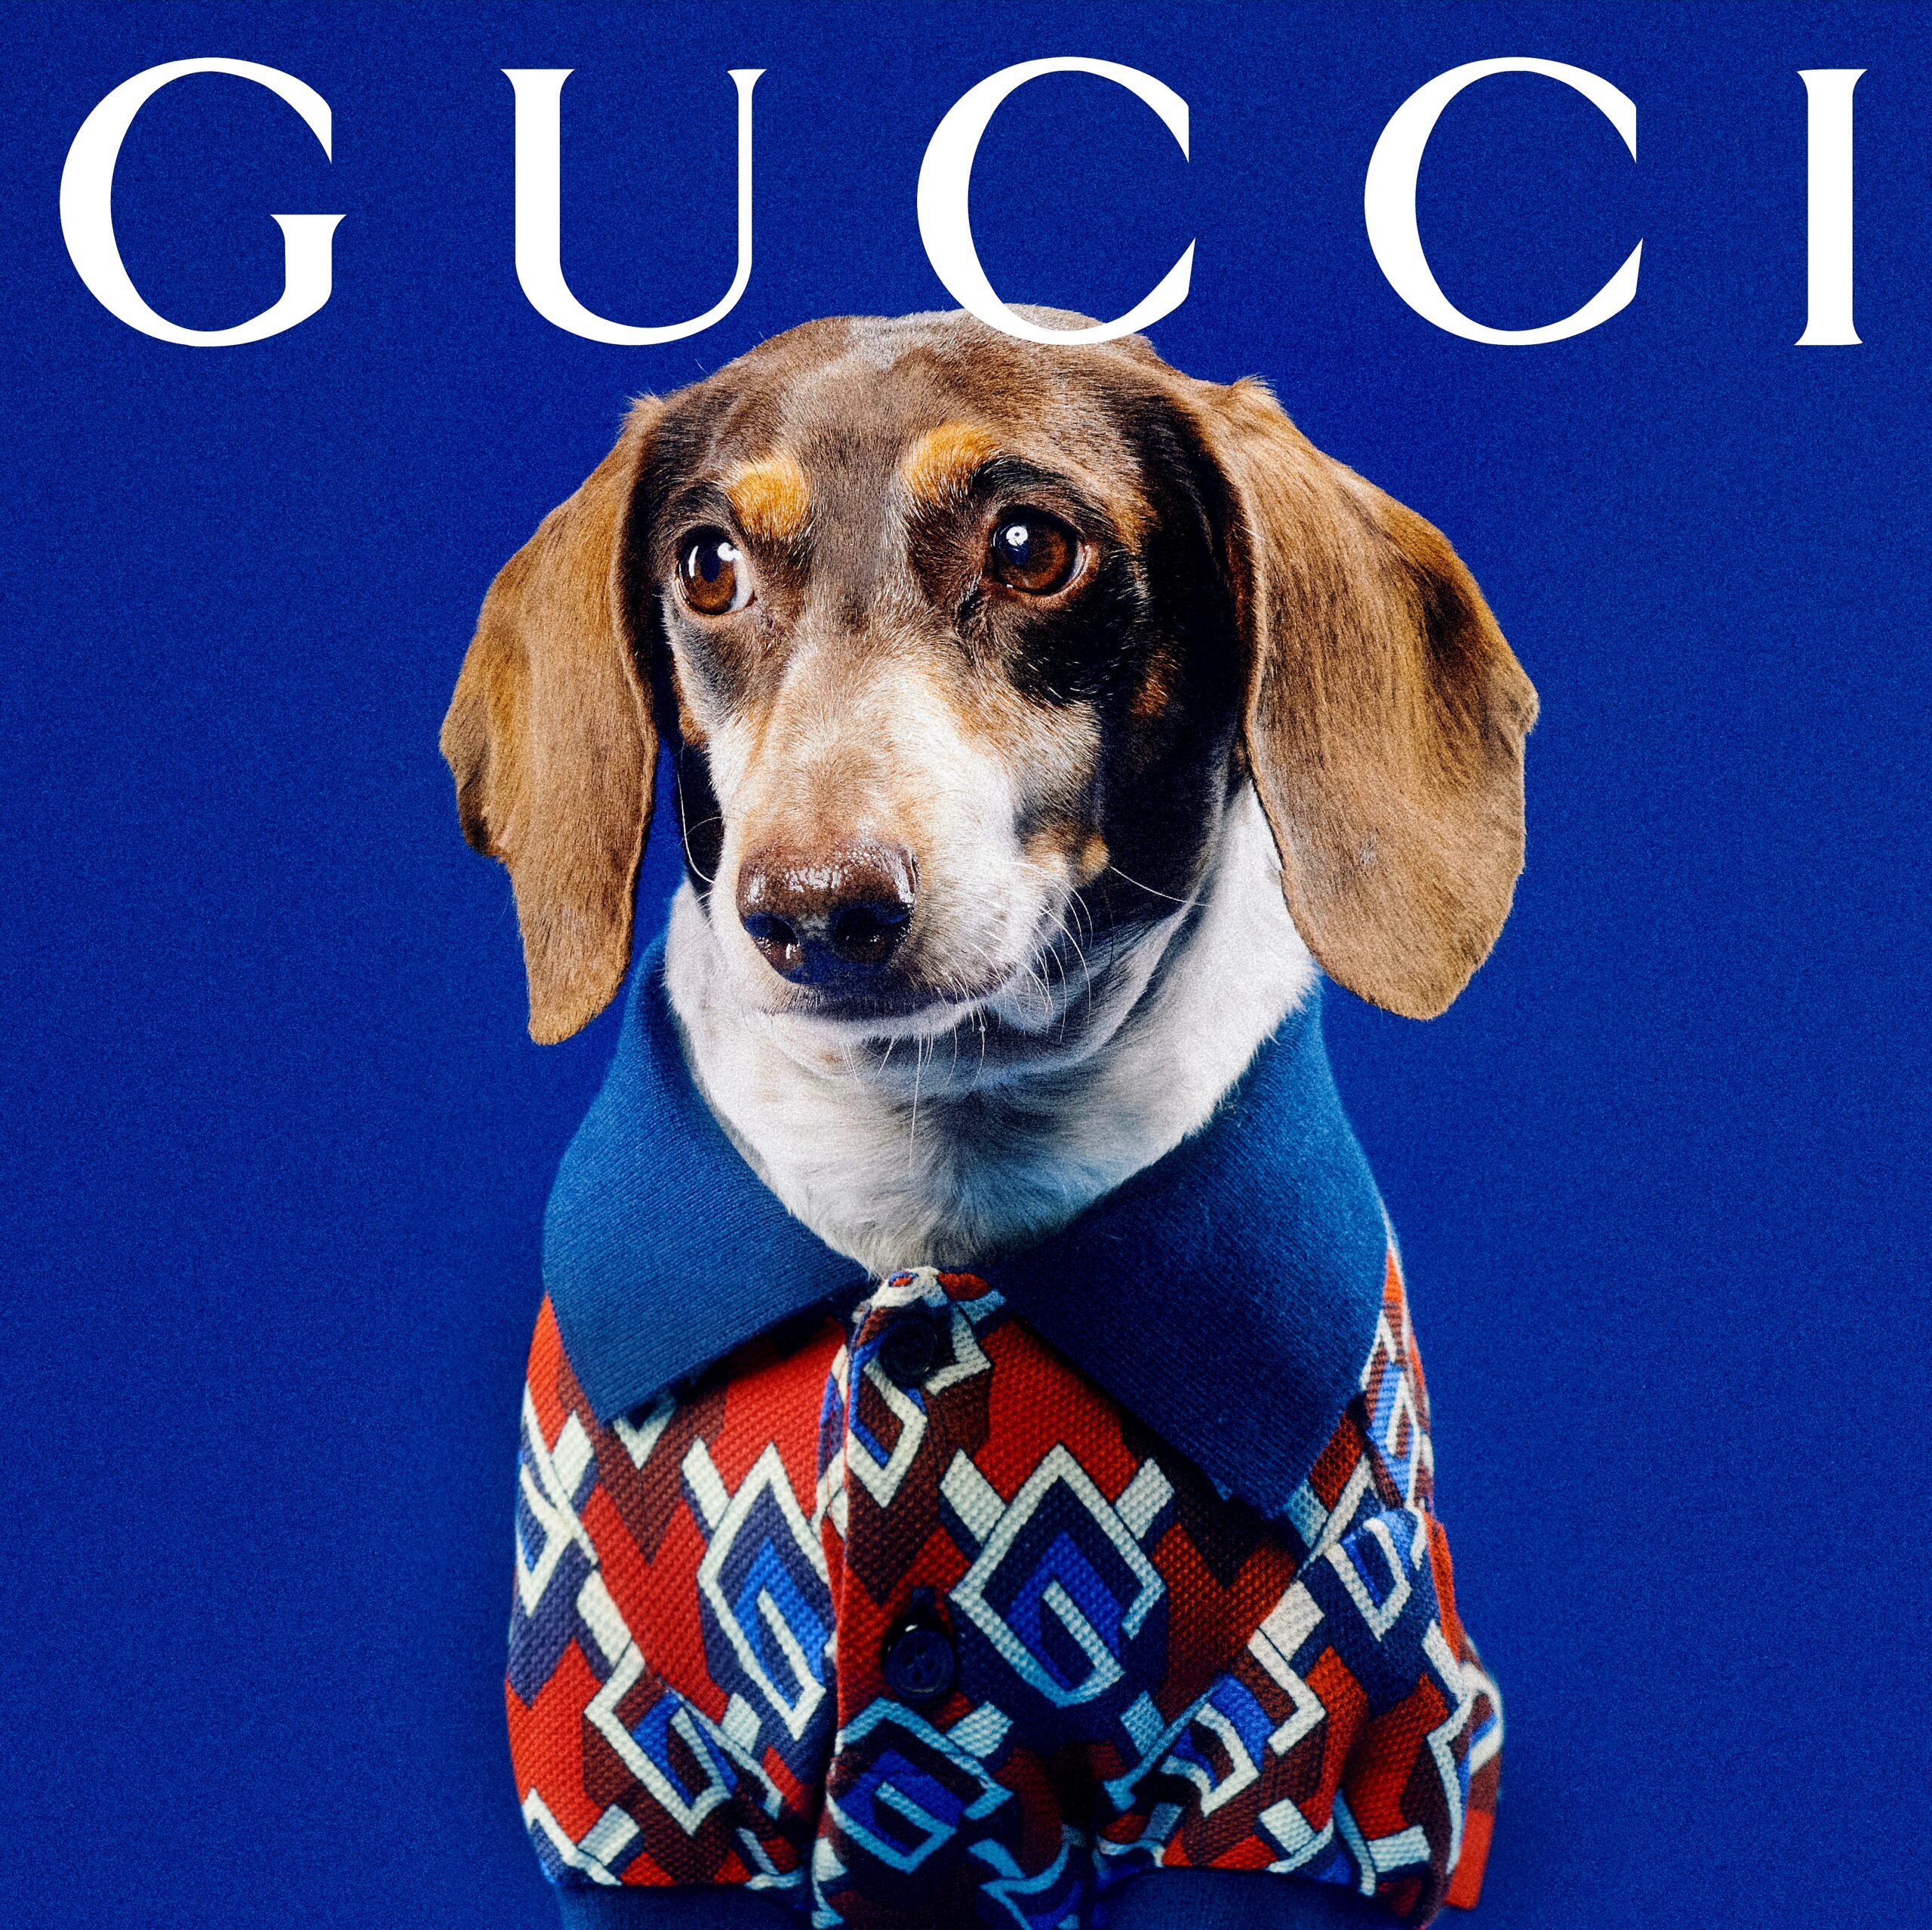 Gucci Pet collection via Gucci for use by 360 Magazine